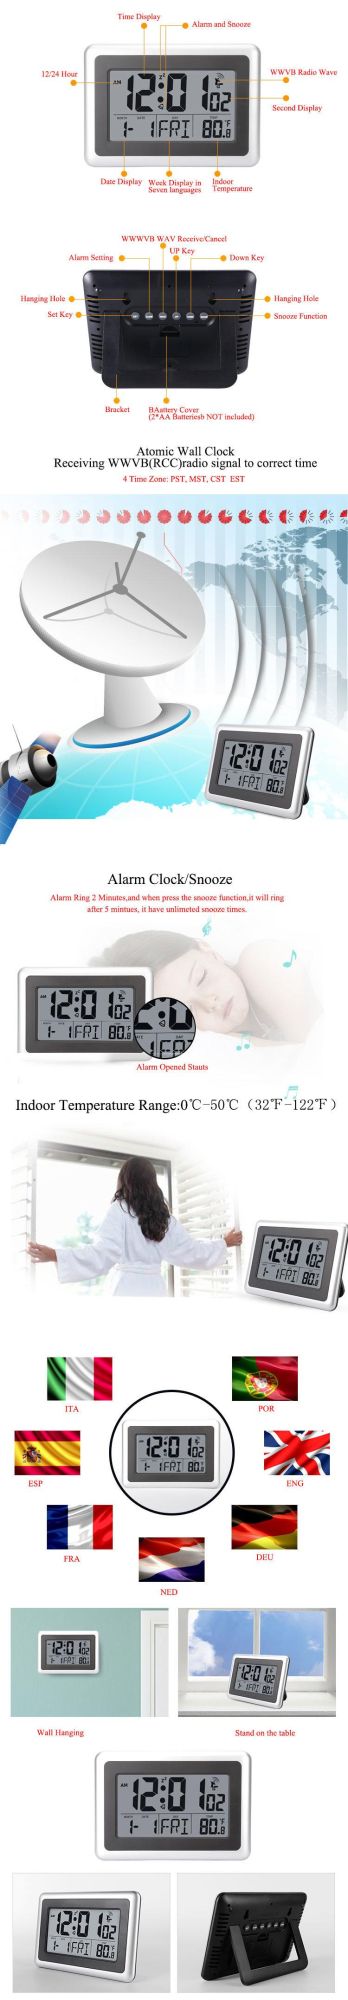 Digital Wall Clock Office Clock Large Display Desk Clock for Seniors, 4 Time Zone, Auto Dst Wholesale